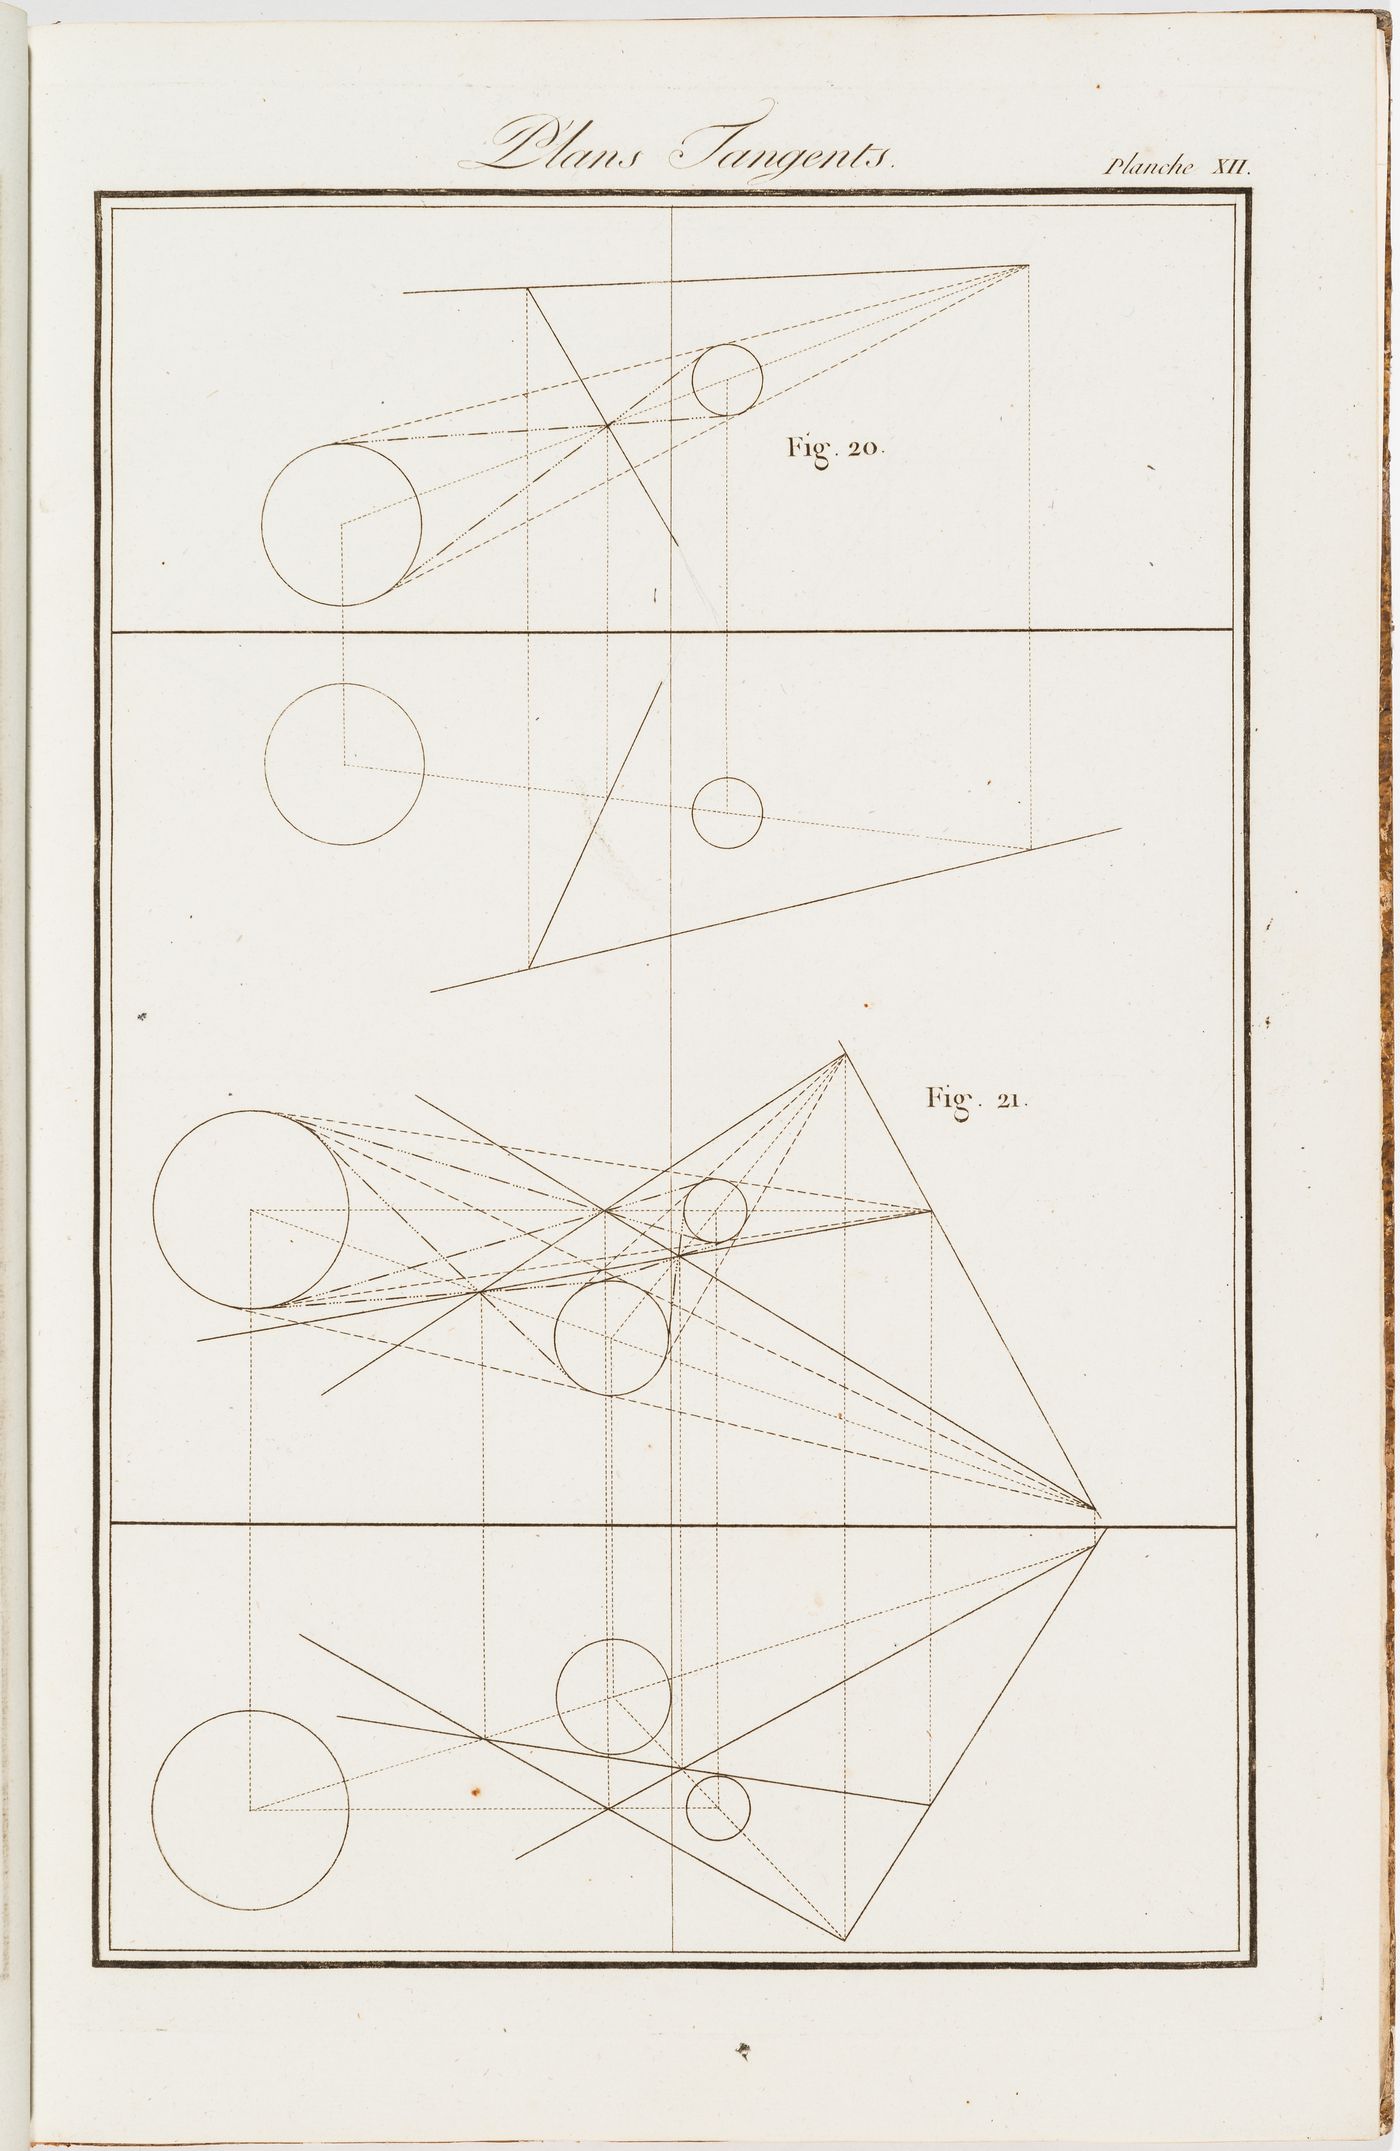 "Plans Tangents": two geometry exercises